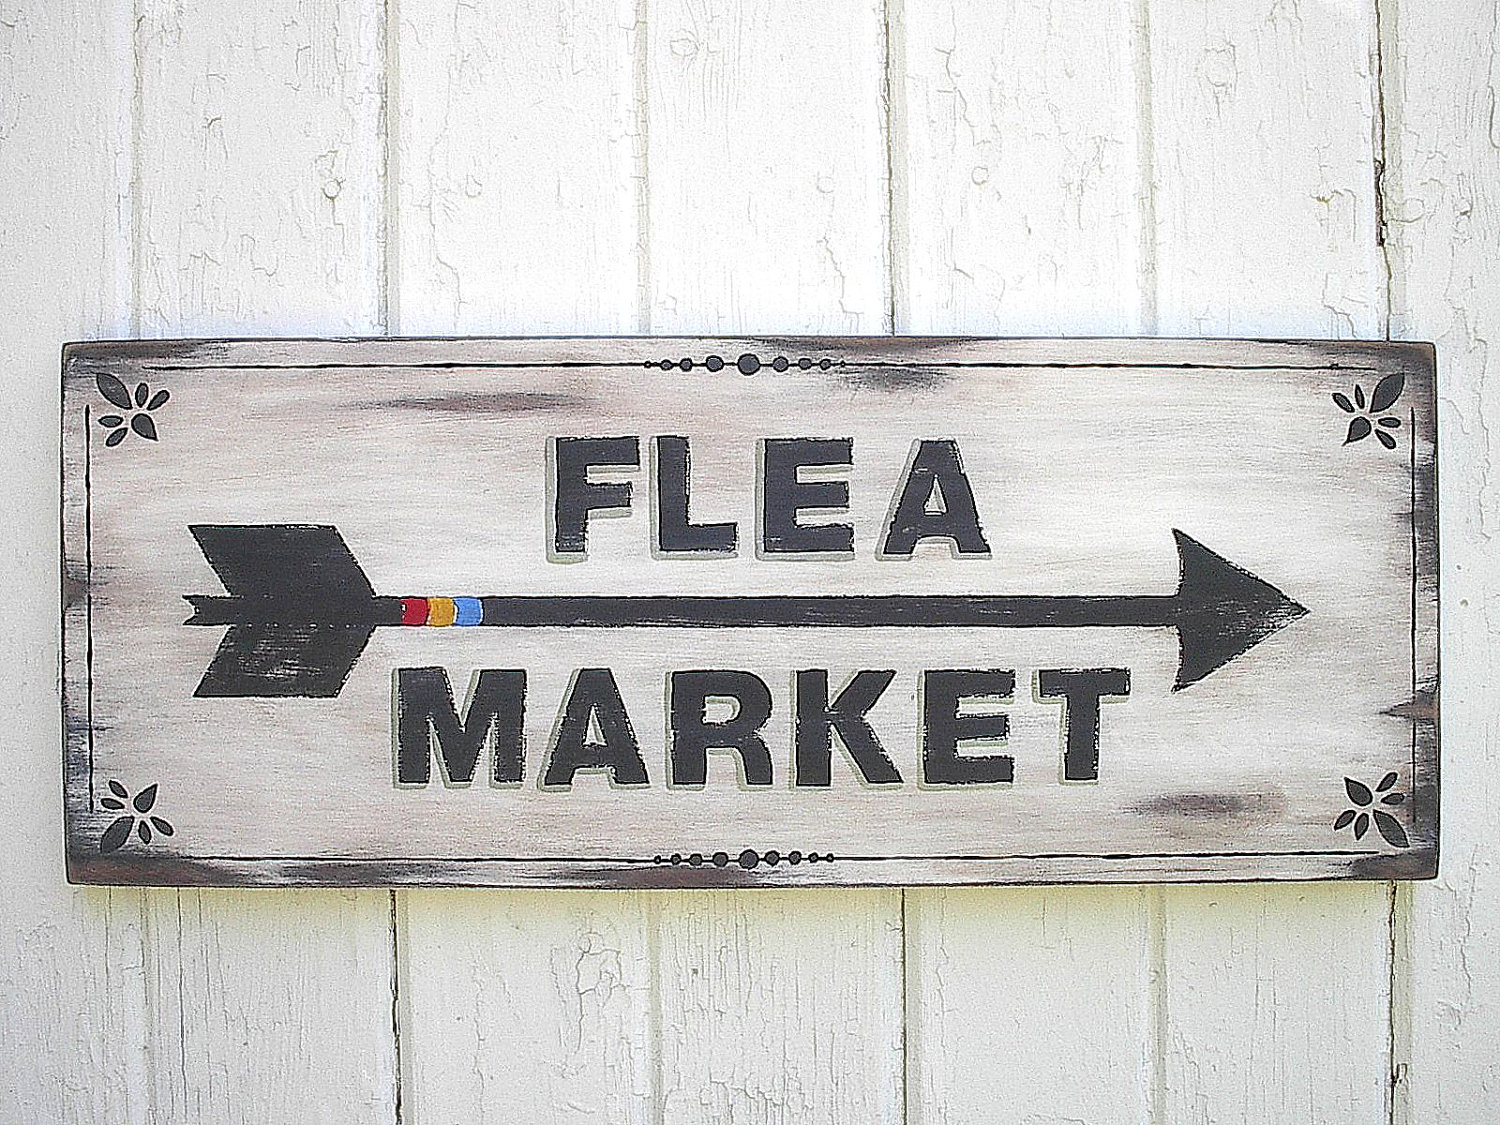 What are some ways to spruce up a flea market listing ad?